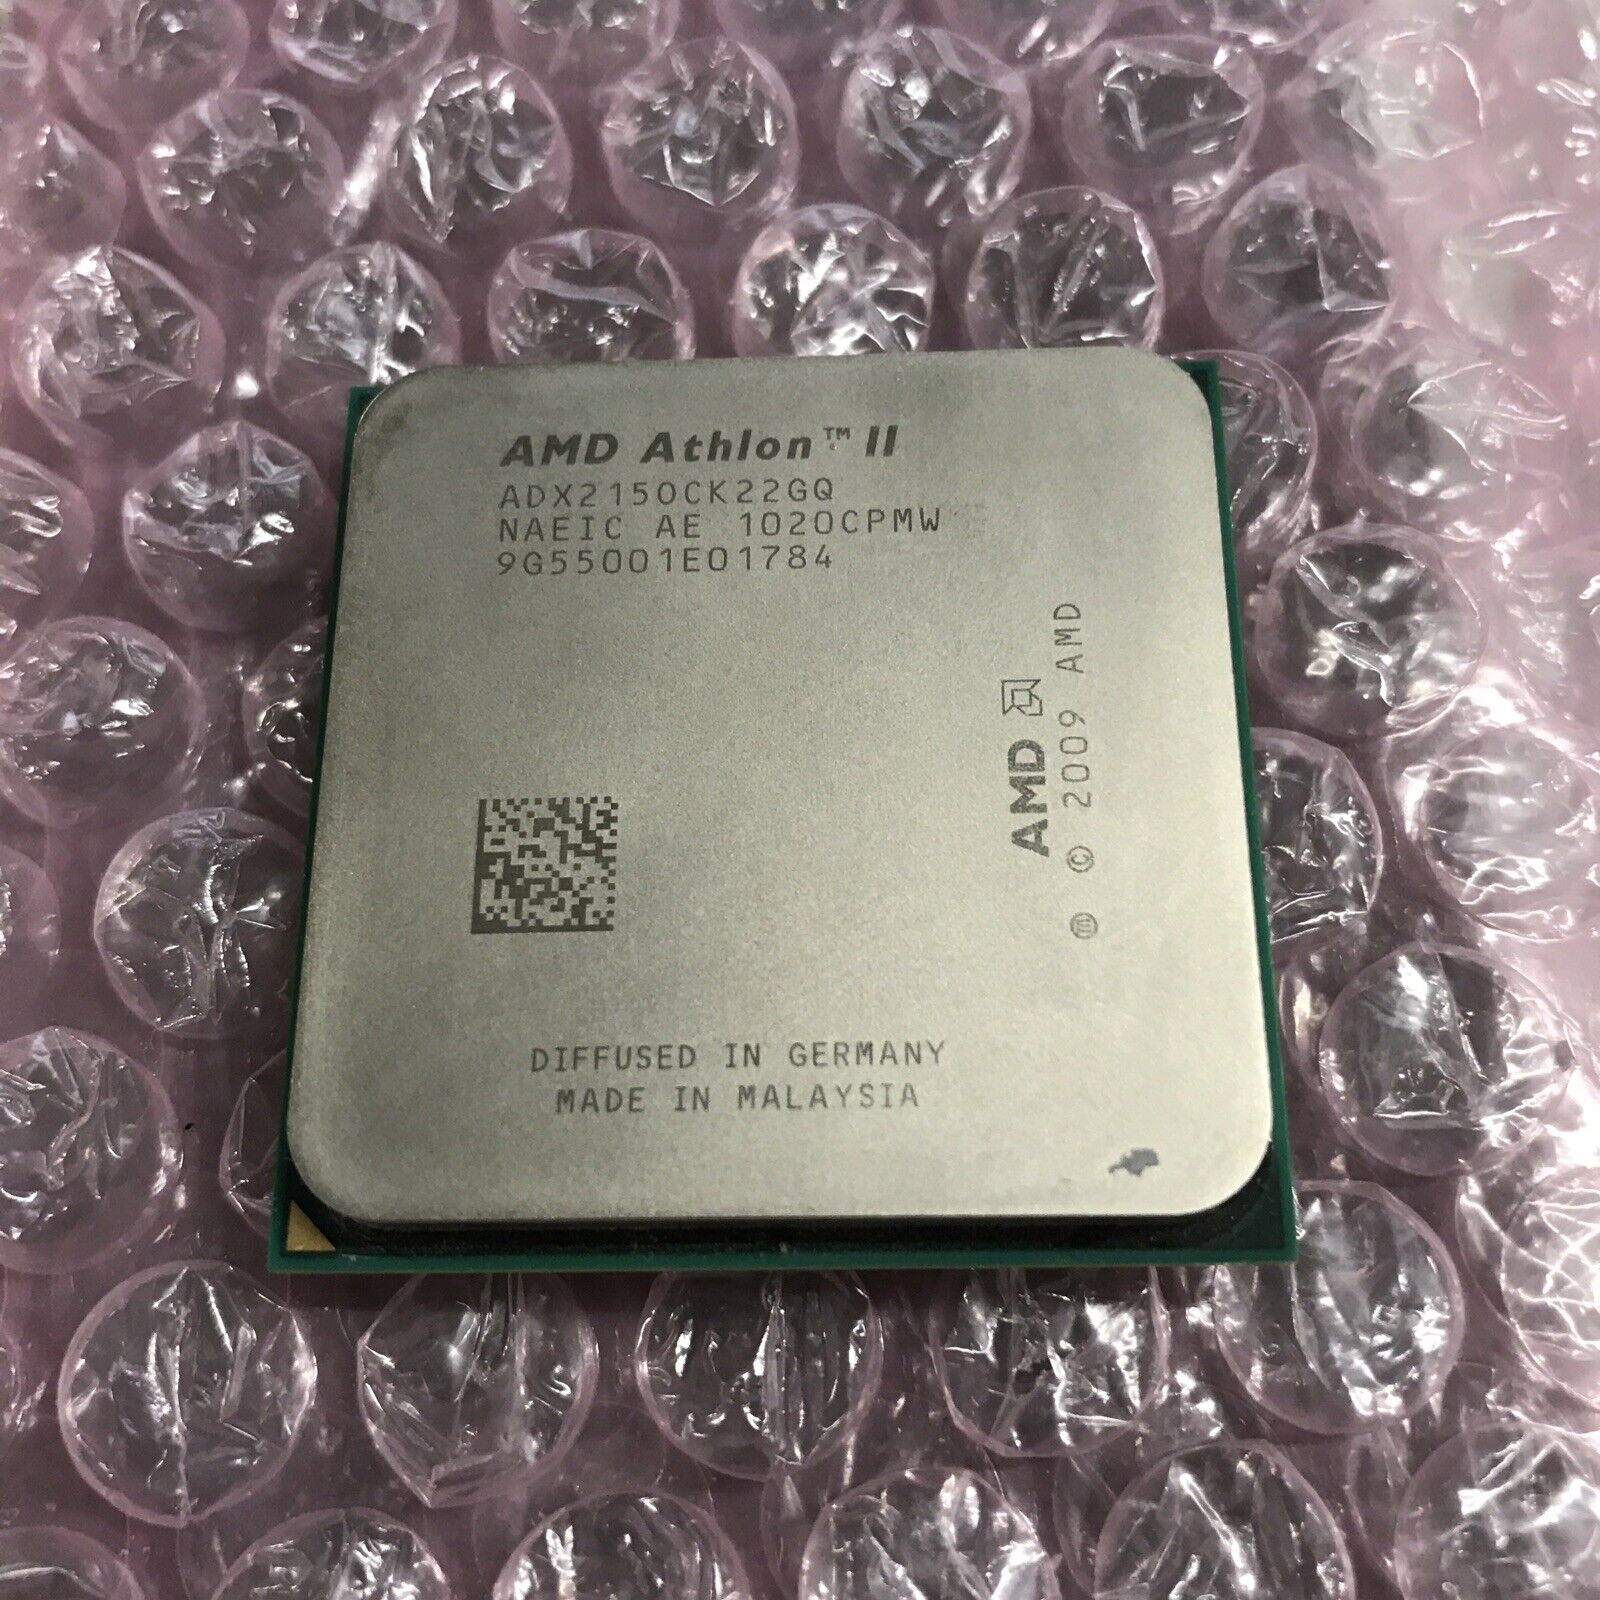 AMD Athlon II ADX2150CK22GQ (Tested and Working)